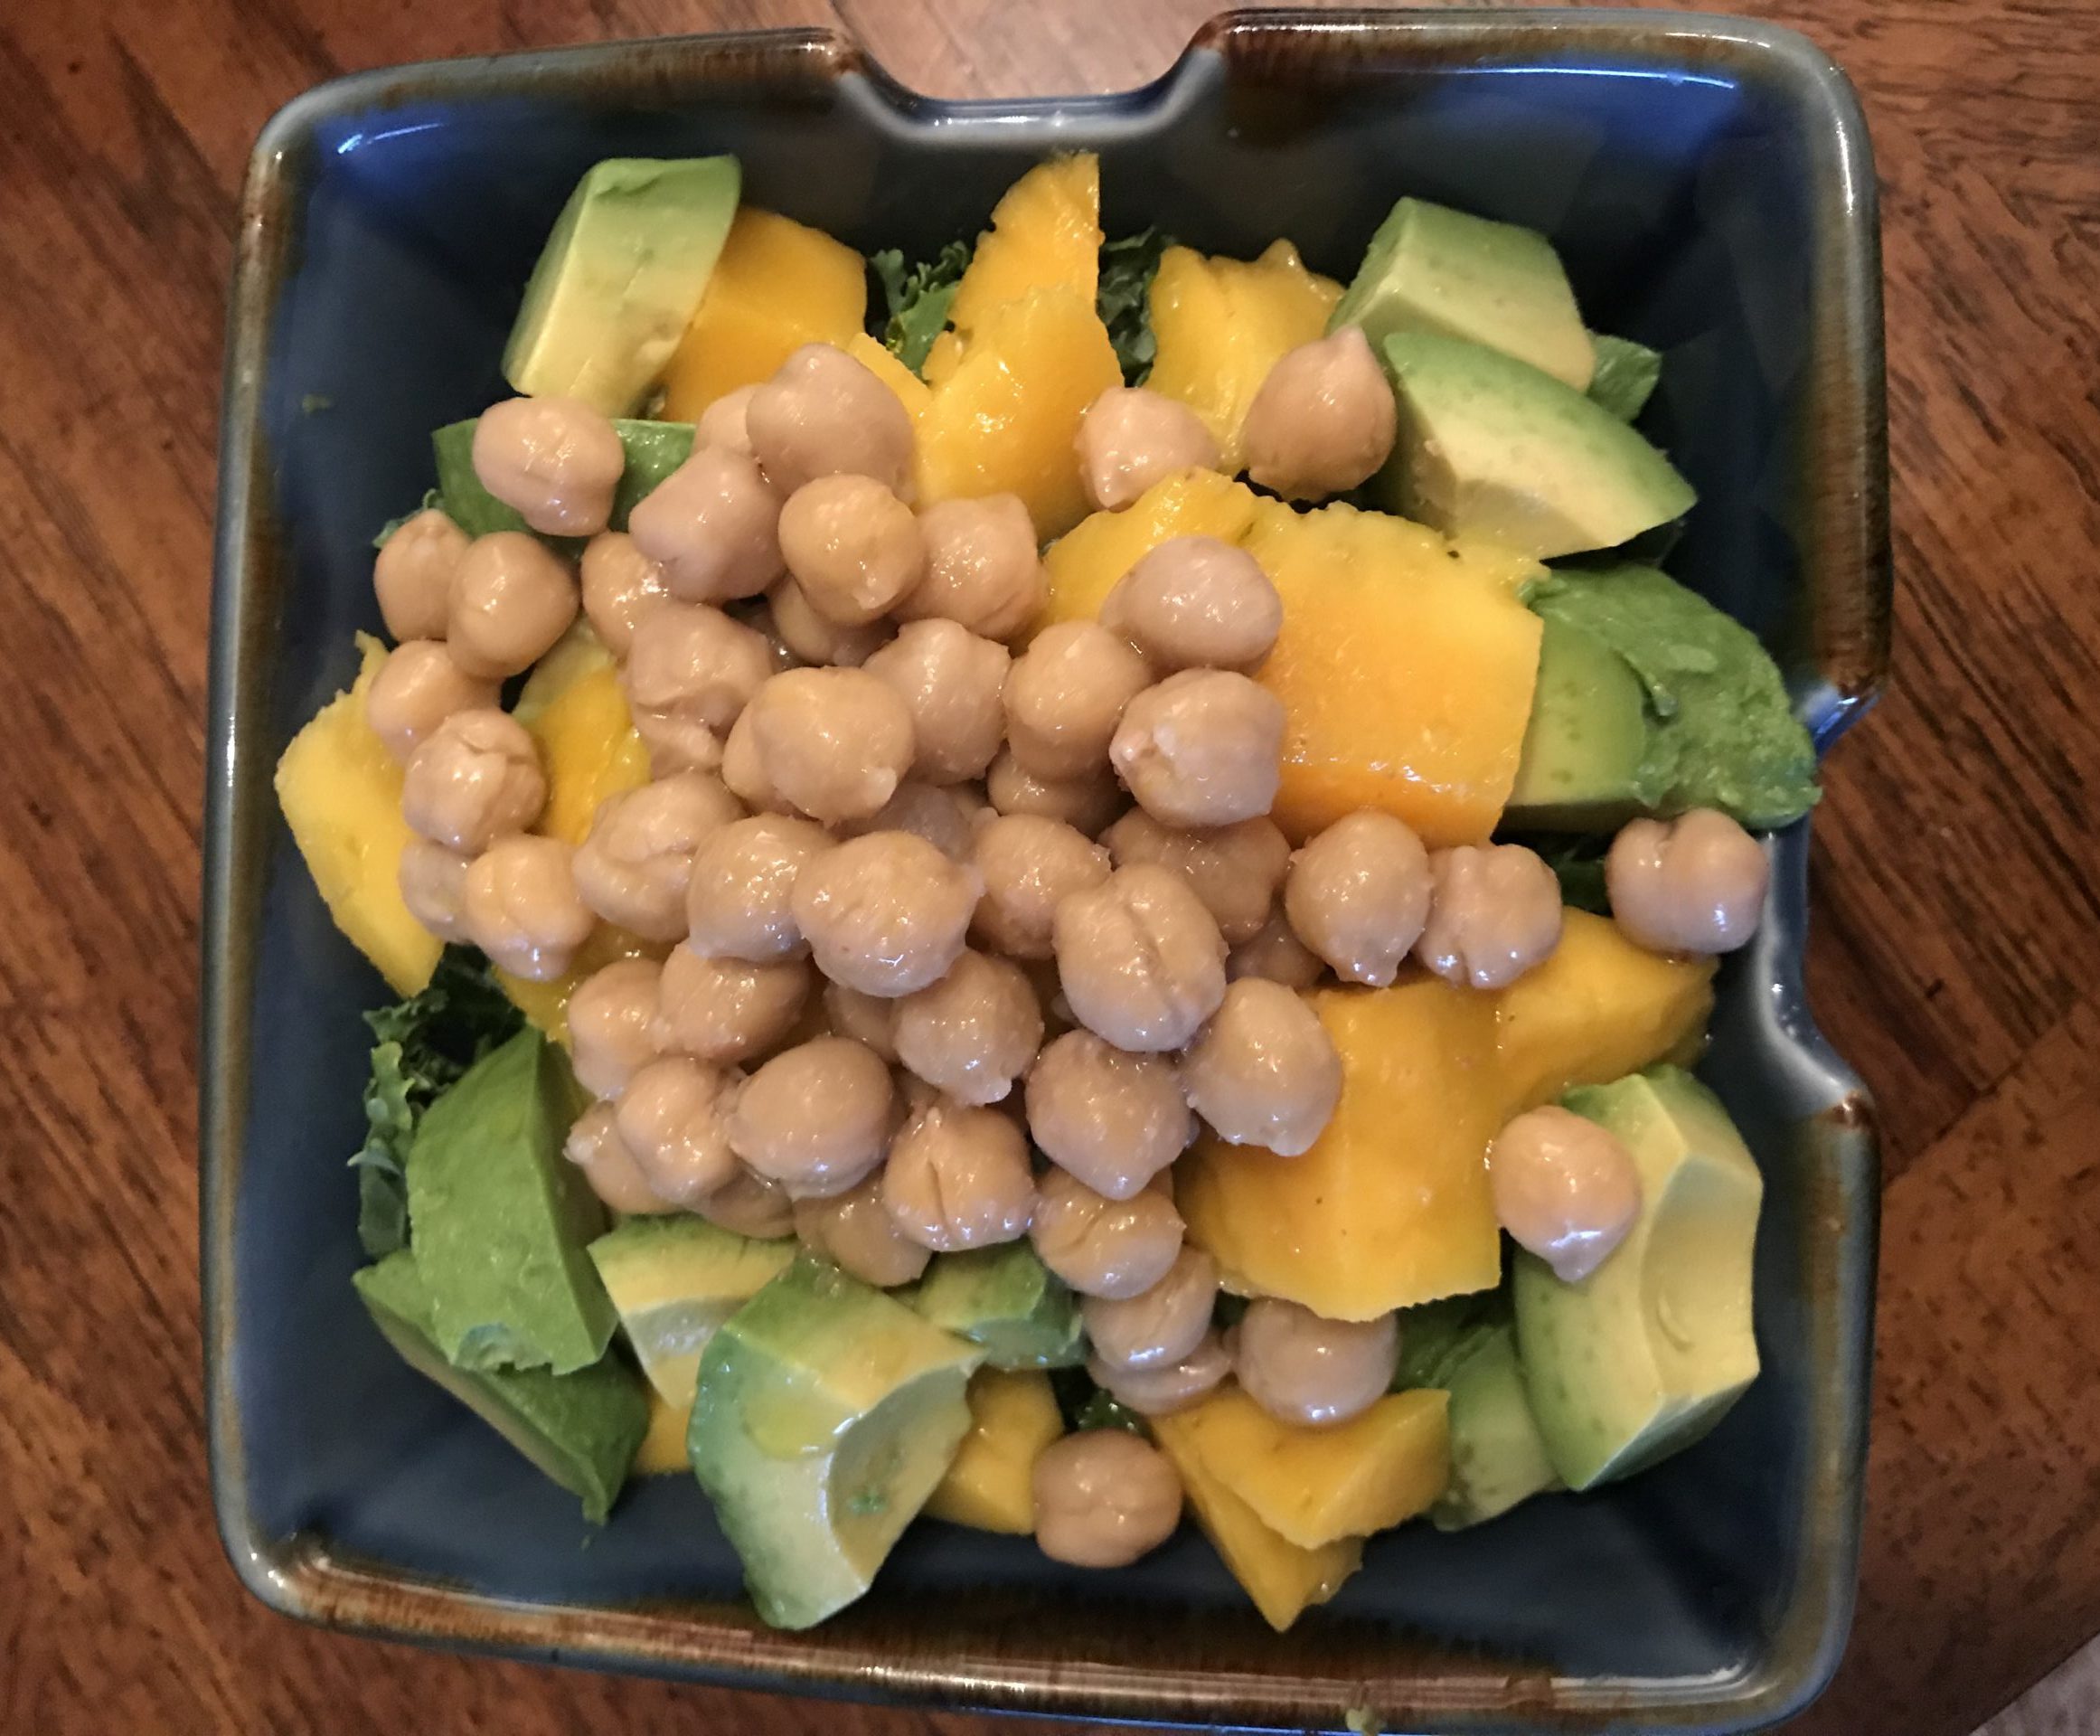 Easy Meals for Busy moms on the go by Miami Moms Blog Contributor Adita Lang